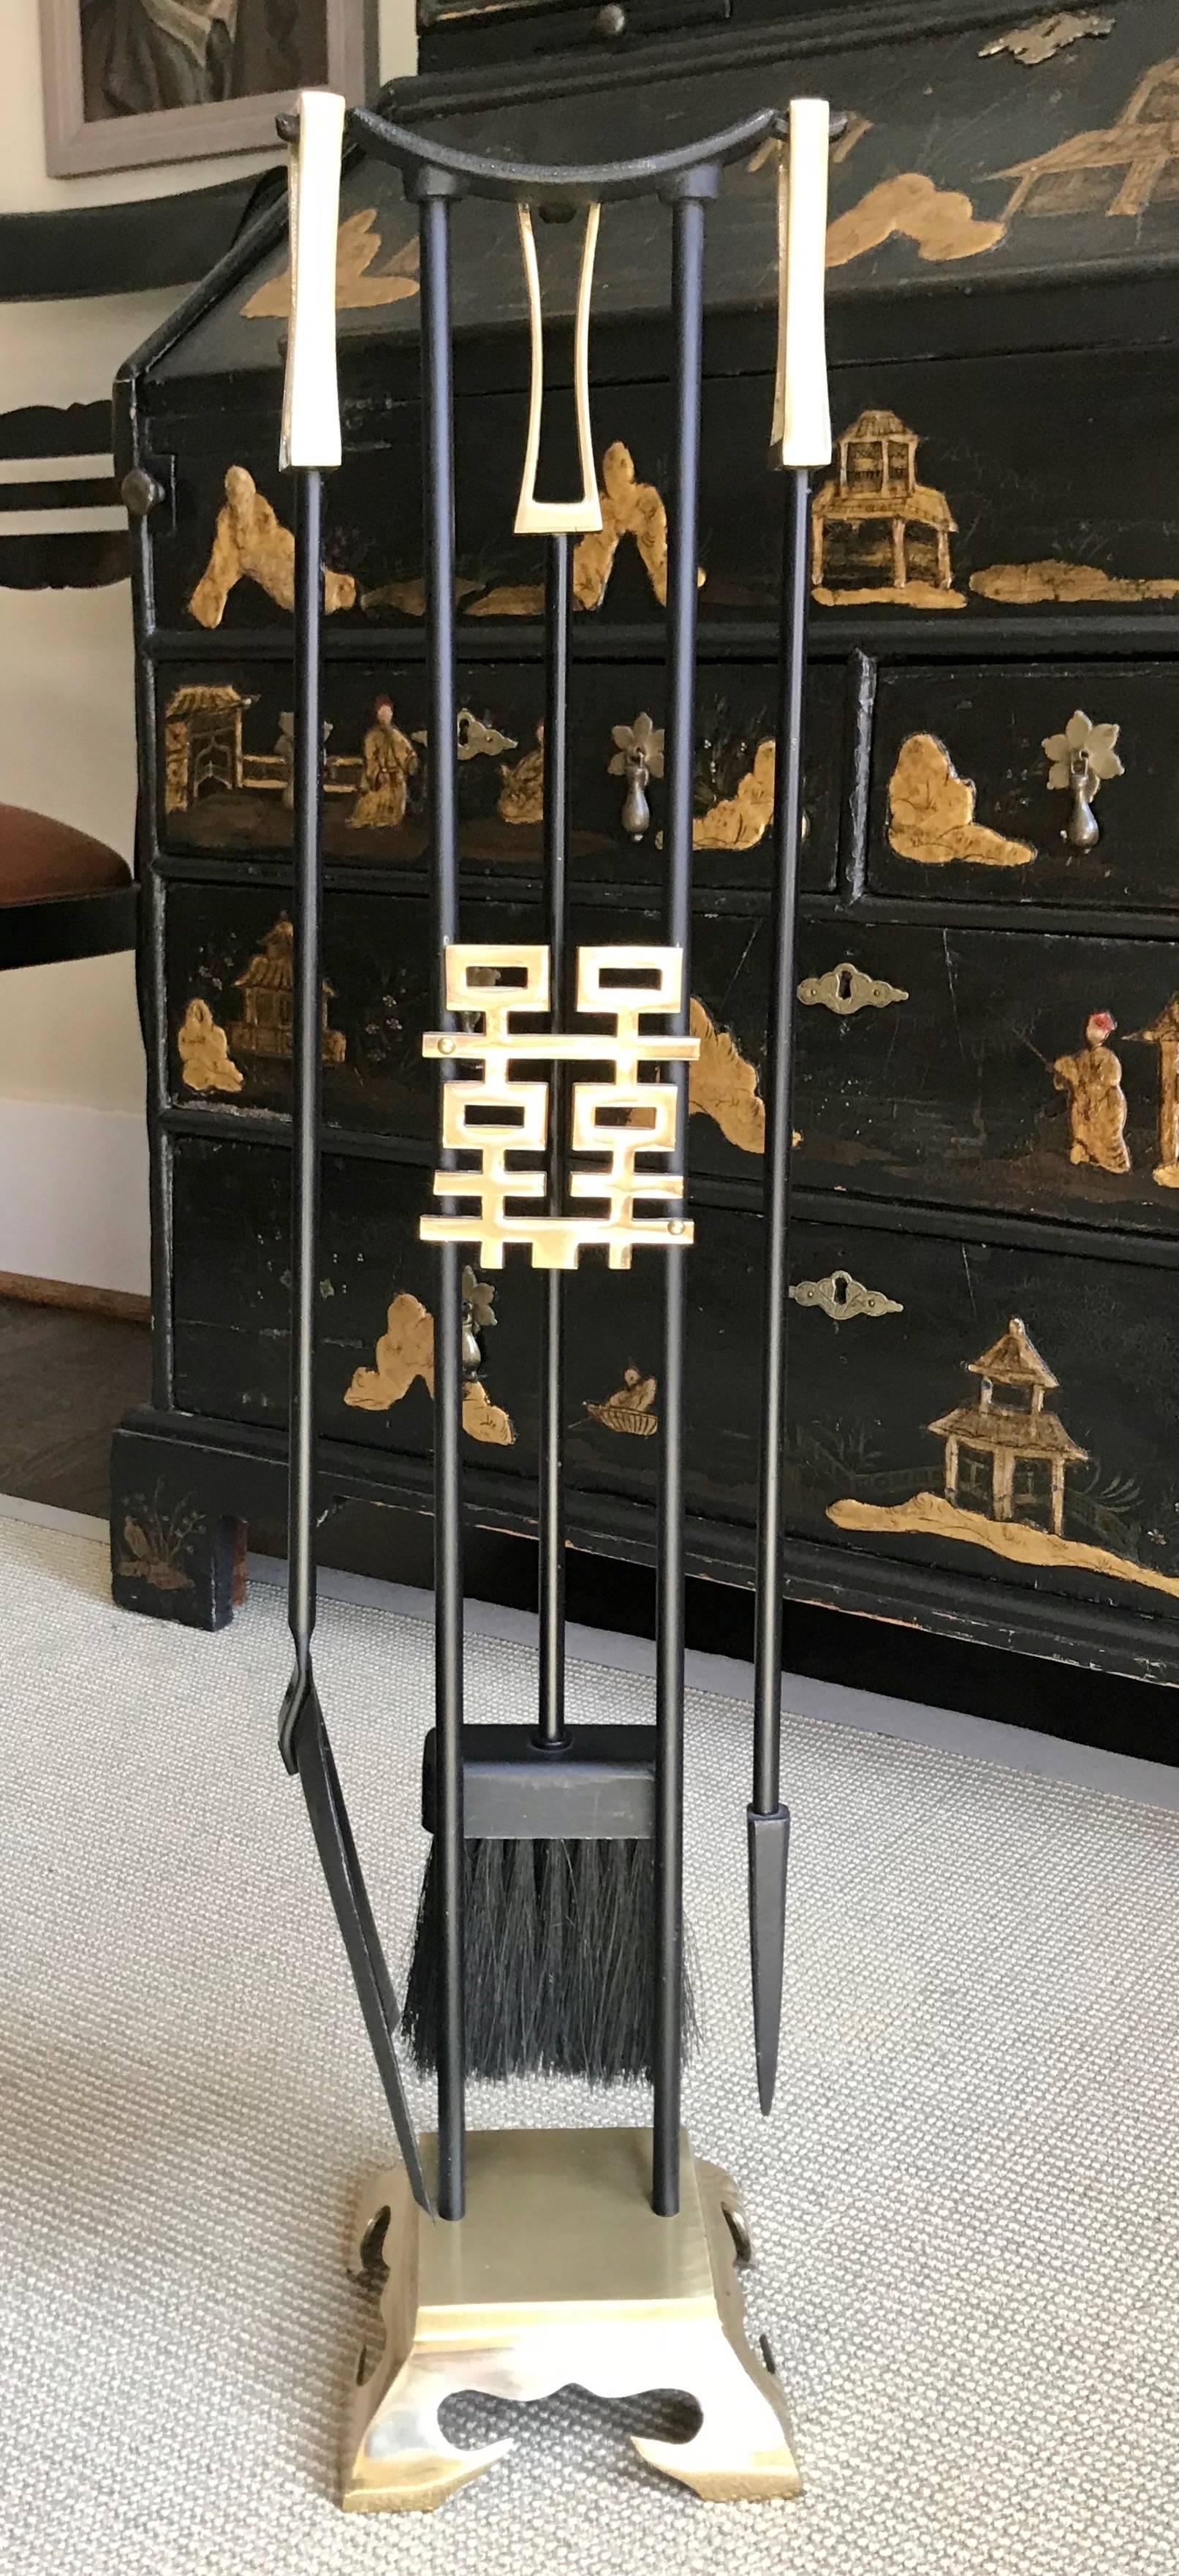 Set of fireplace tools in Asian Modern style crafted from brass and black painted iron or steel. Set includes three tools and the Stand.

Measures: 6.5